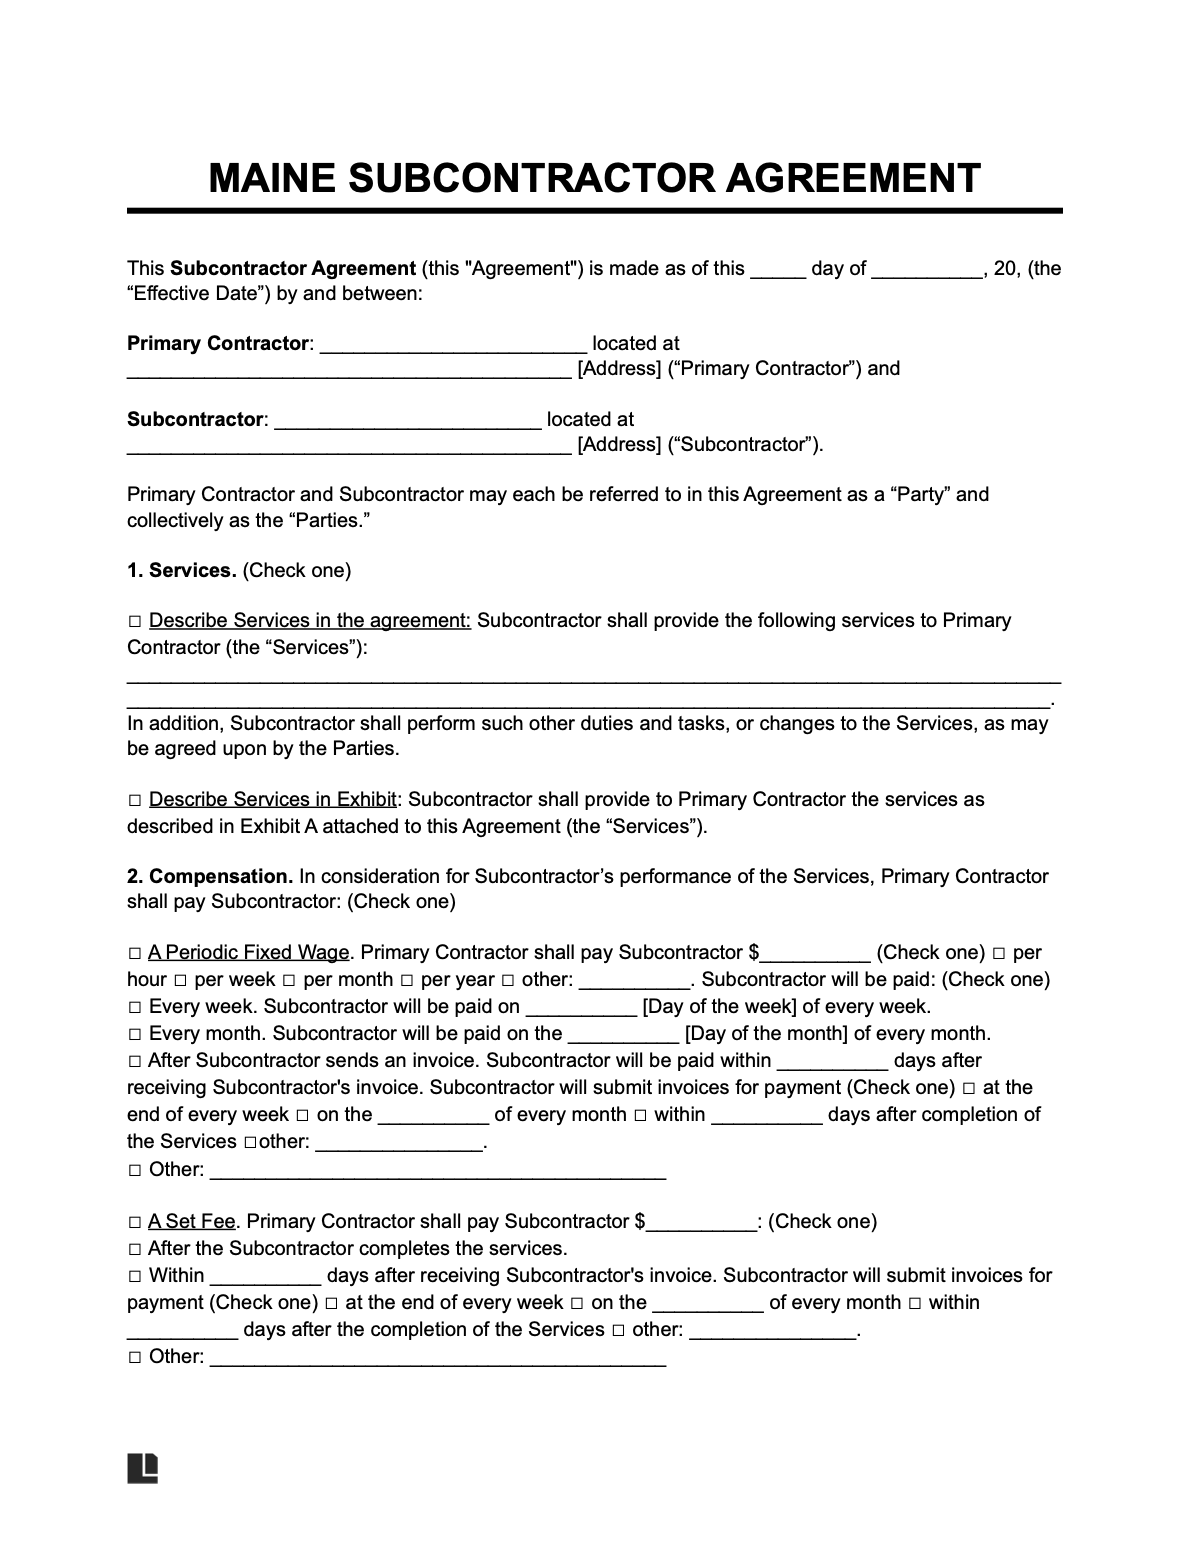 maine subcontractor agreement template